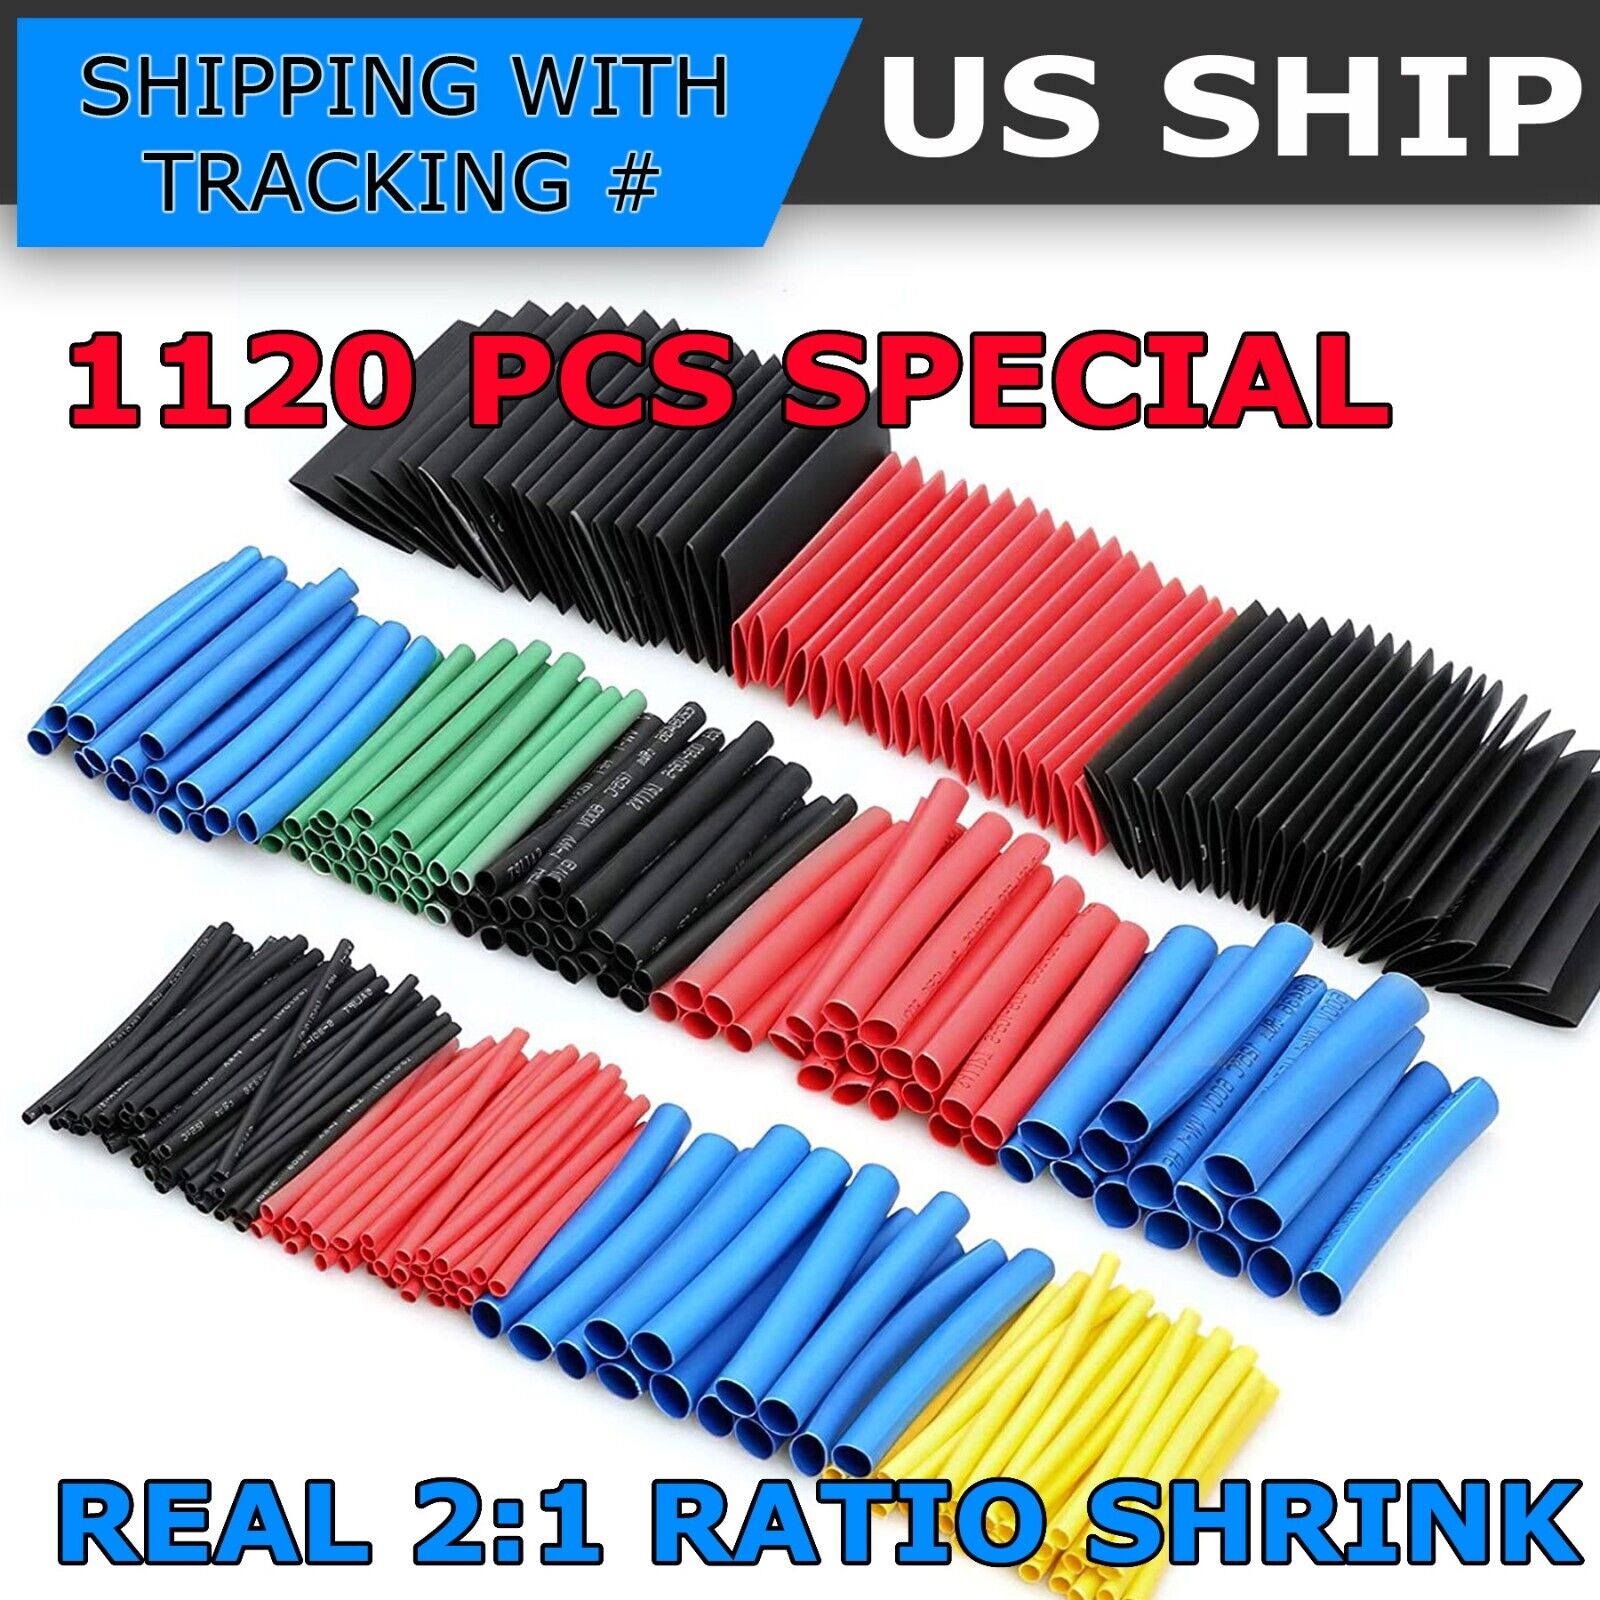 1120Pcs HEAT SHRINK Tubing Insulation Shrinkable Tube 2:1 Wire Cable Sleeve